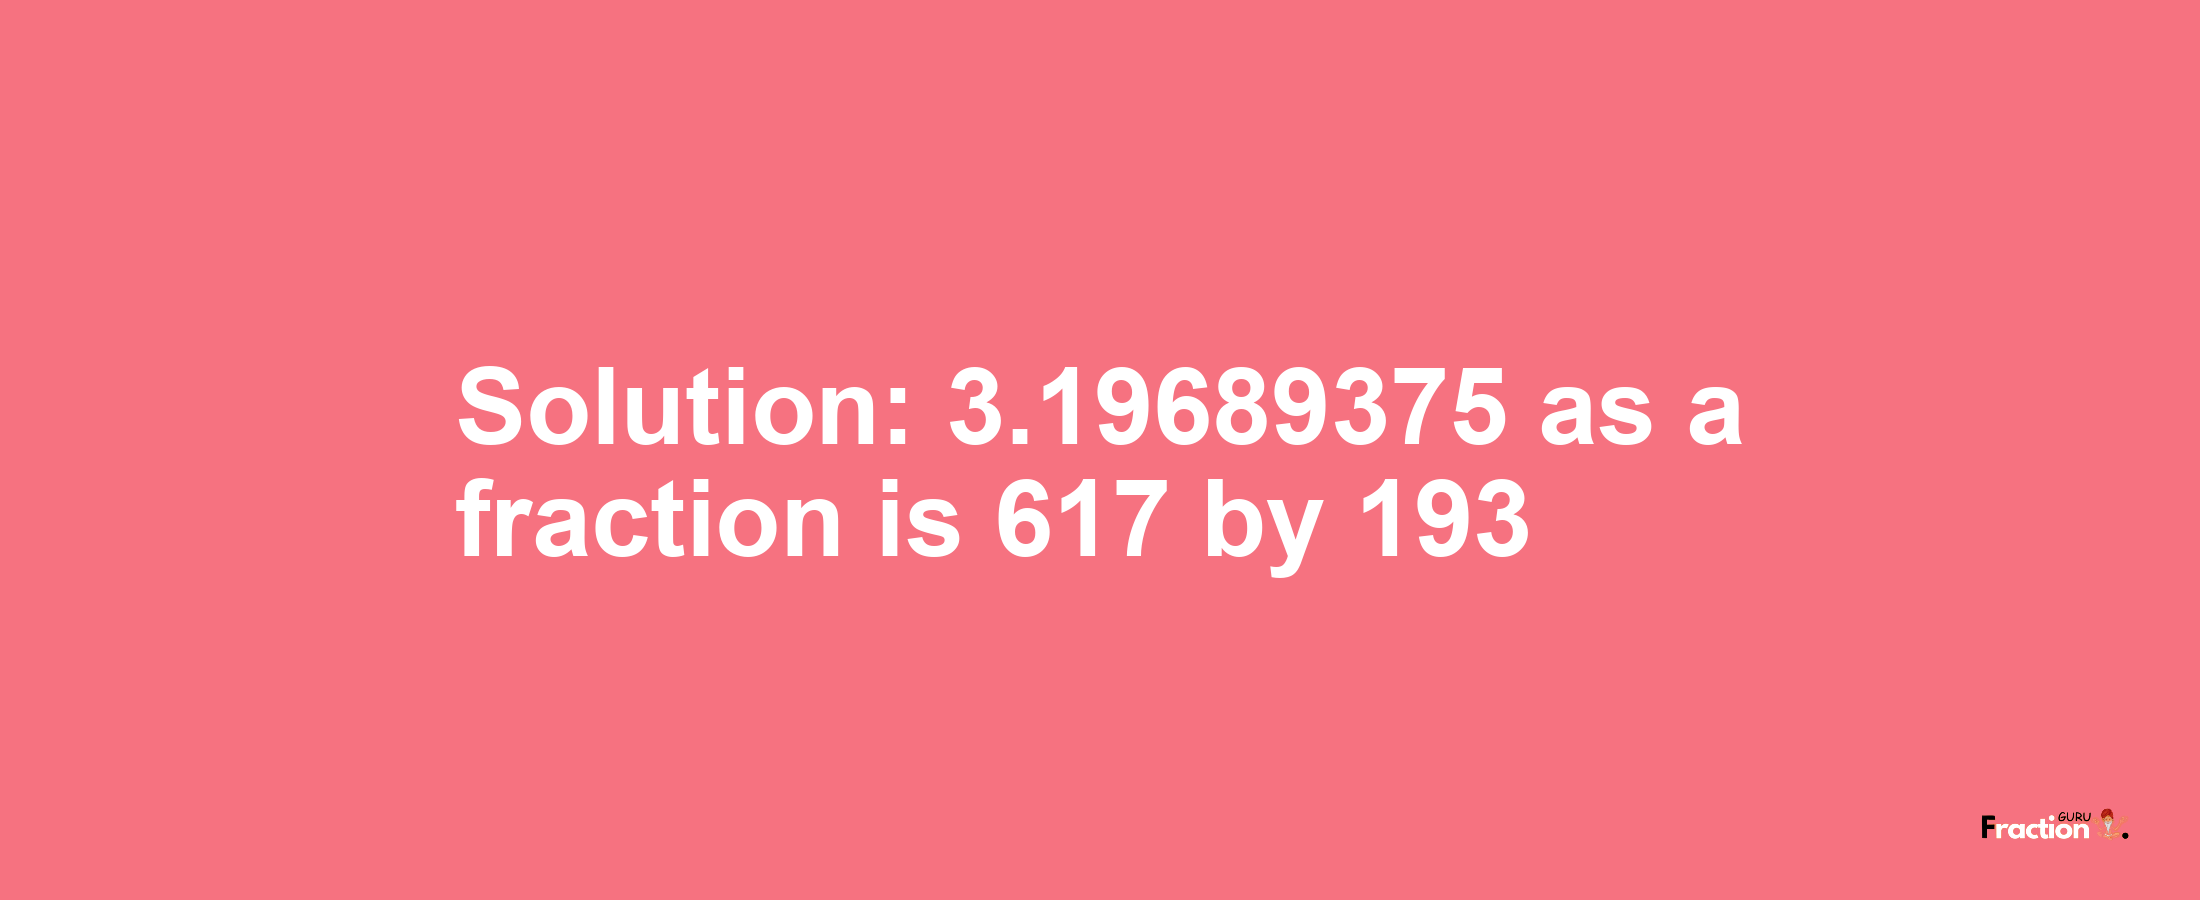 Solution:3.19689375 as a fraction is 617/193